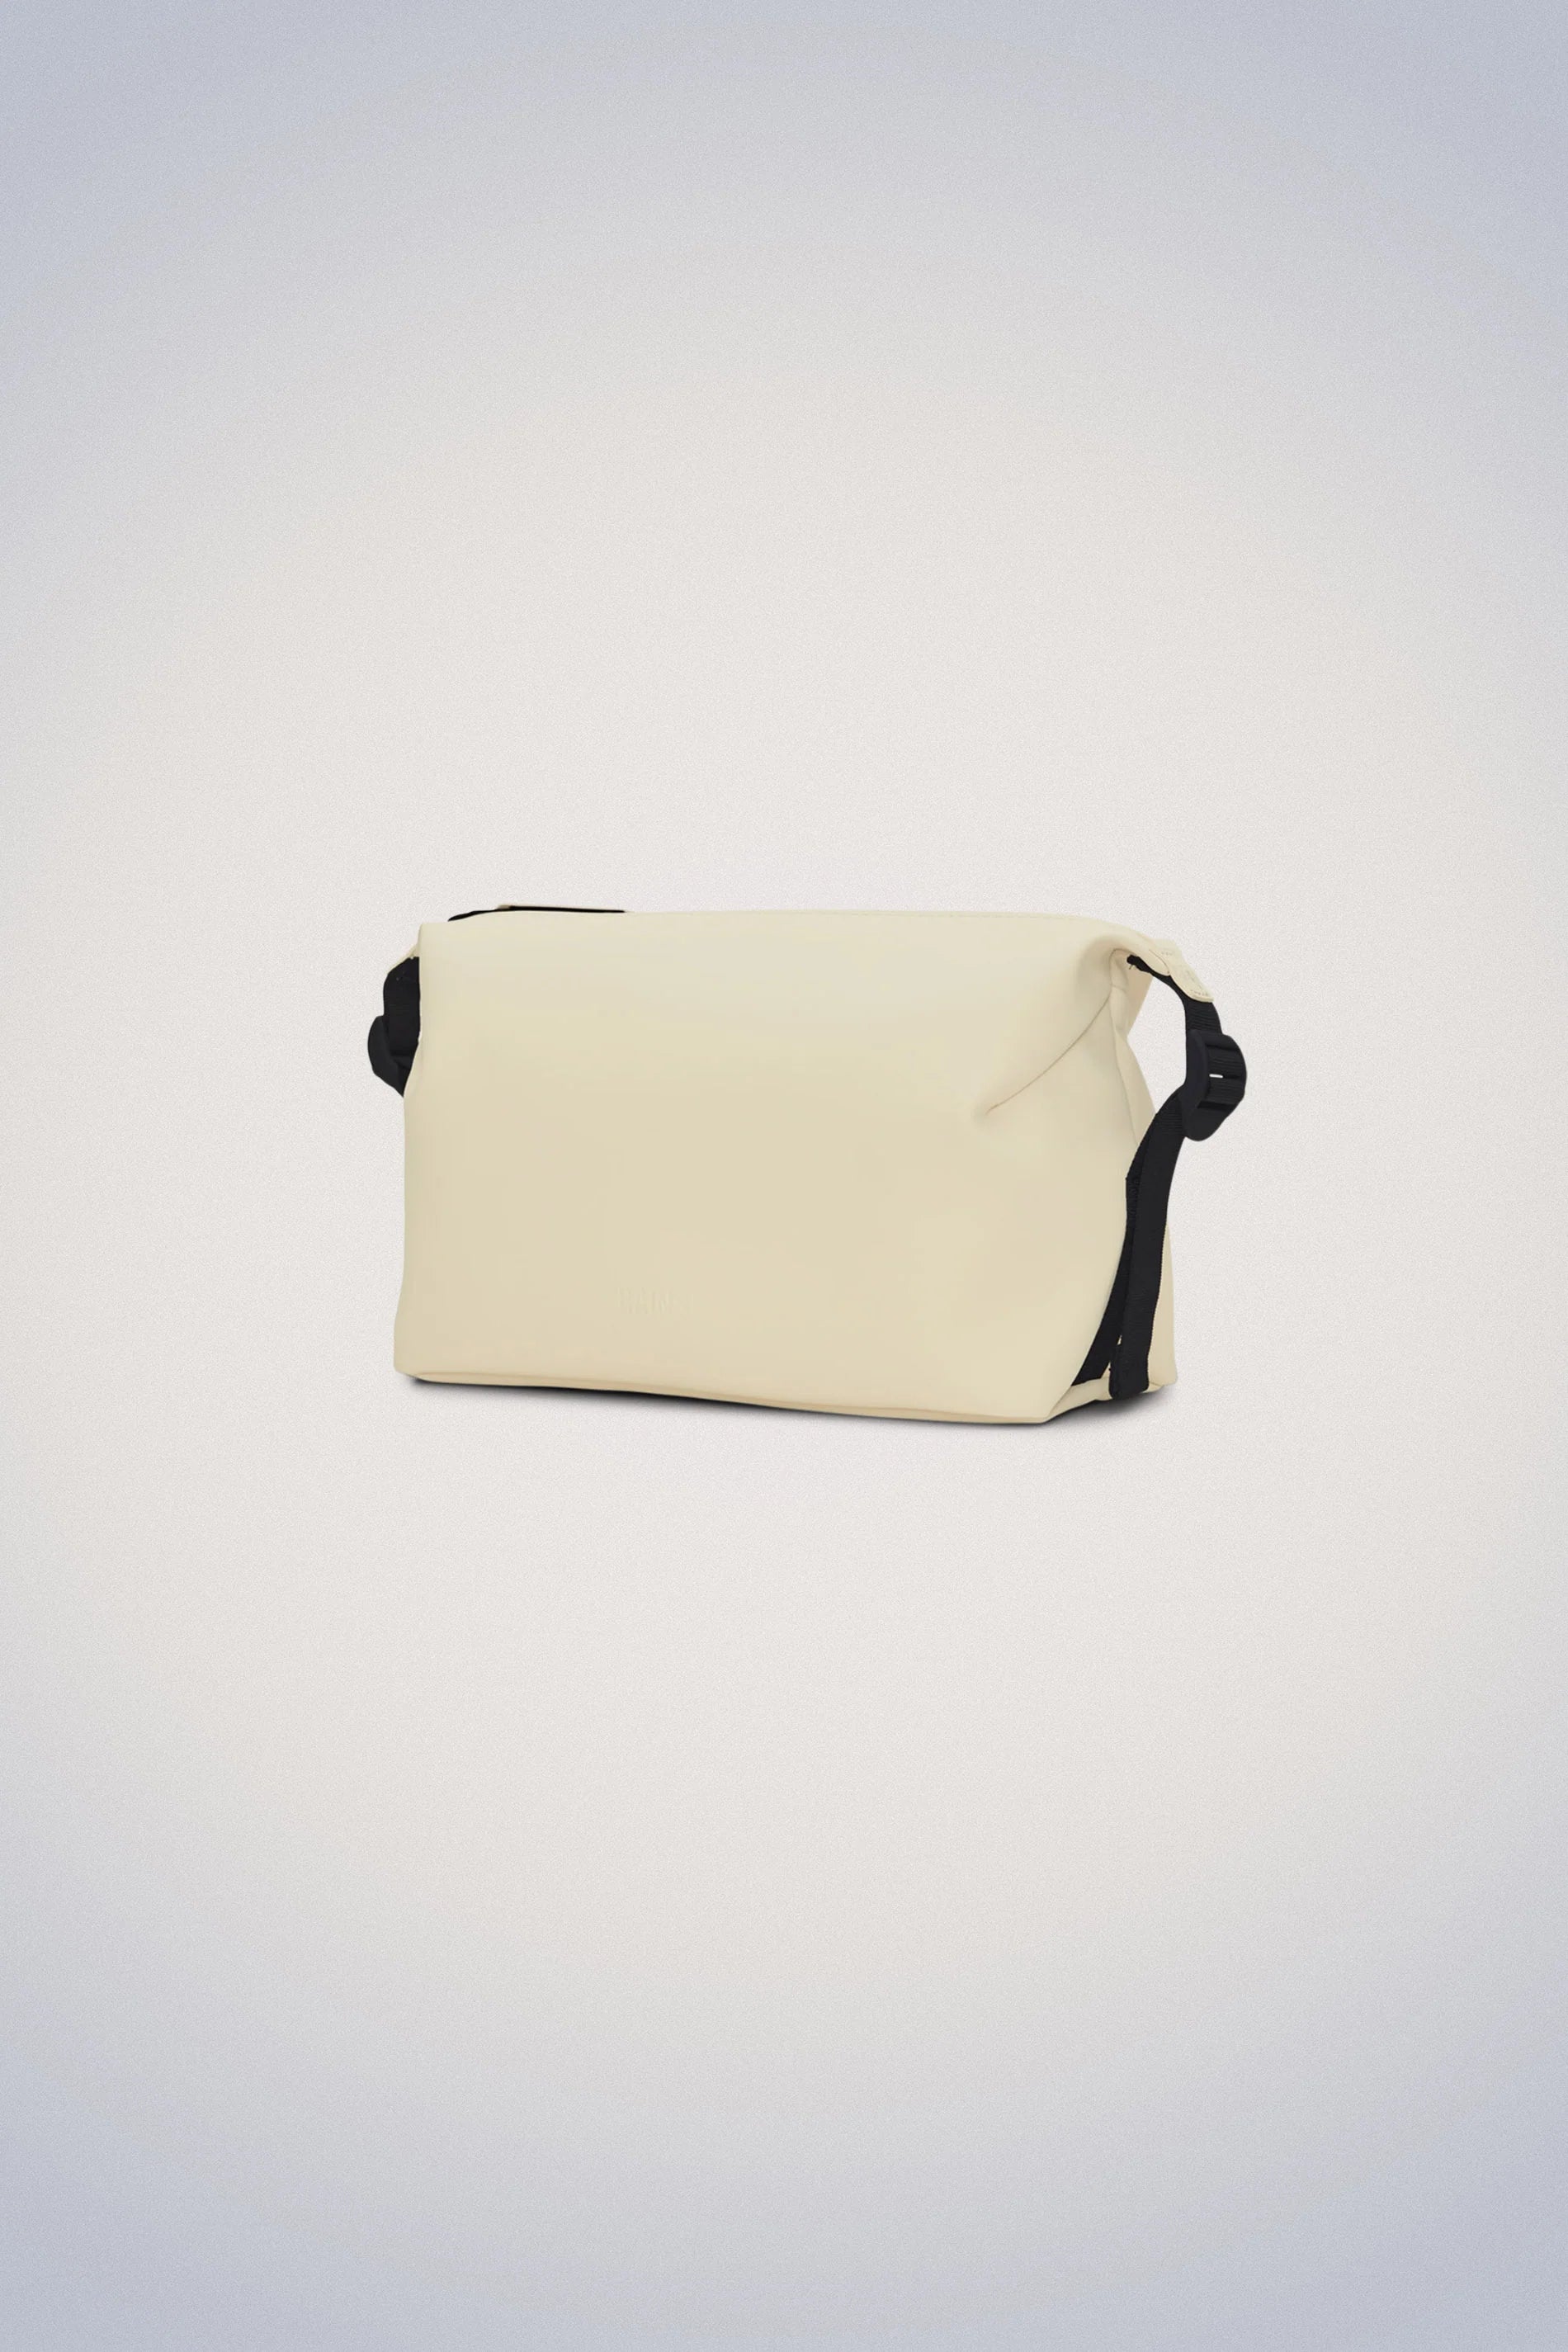 A Hilo Wash Bag - Dune by Rains on a white background.